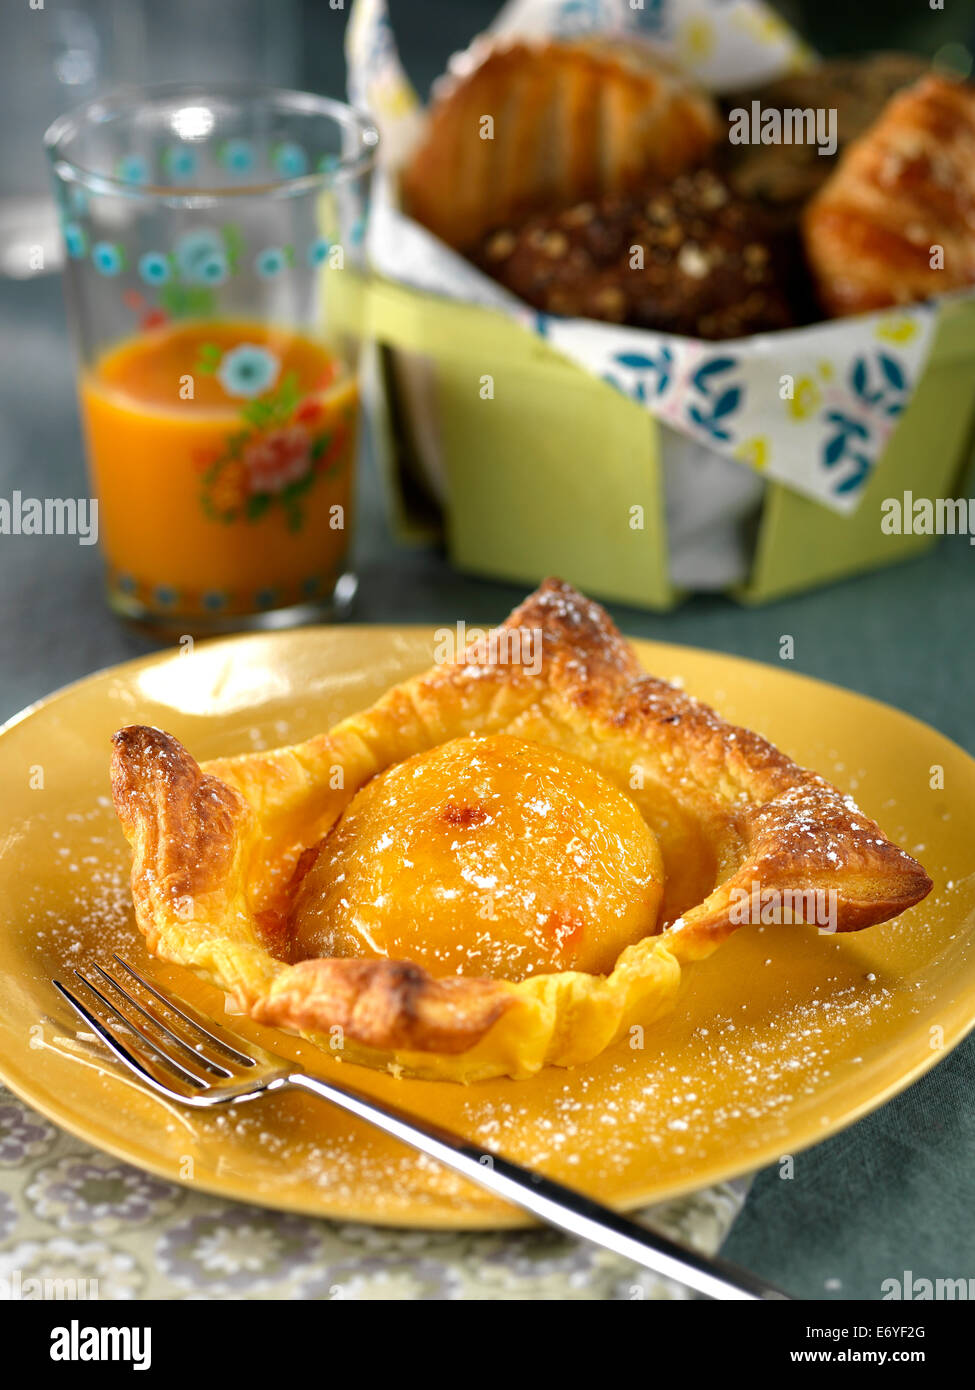 Apricot and apple golden tartlet Stock Photo